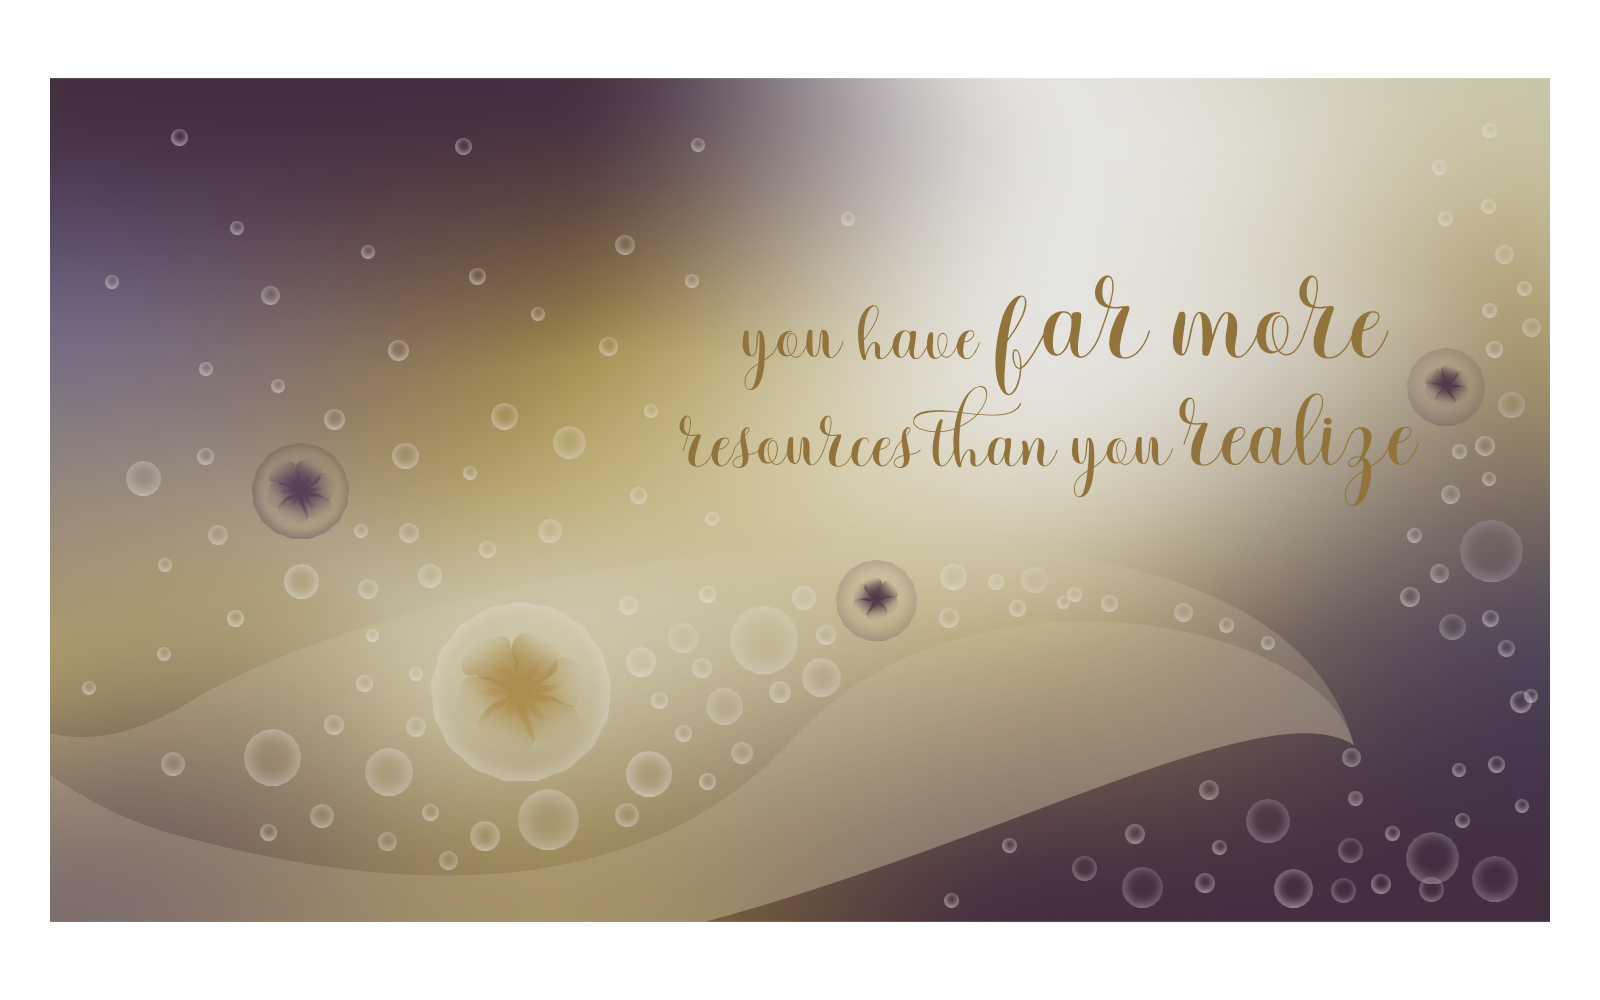 Yellow and Purple Inspirational Background Image 14400x8100px with Message About Resources